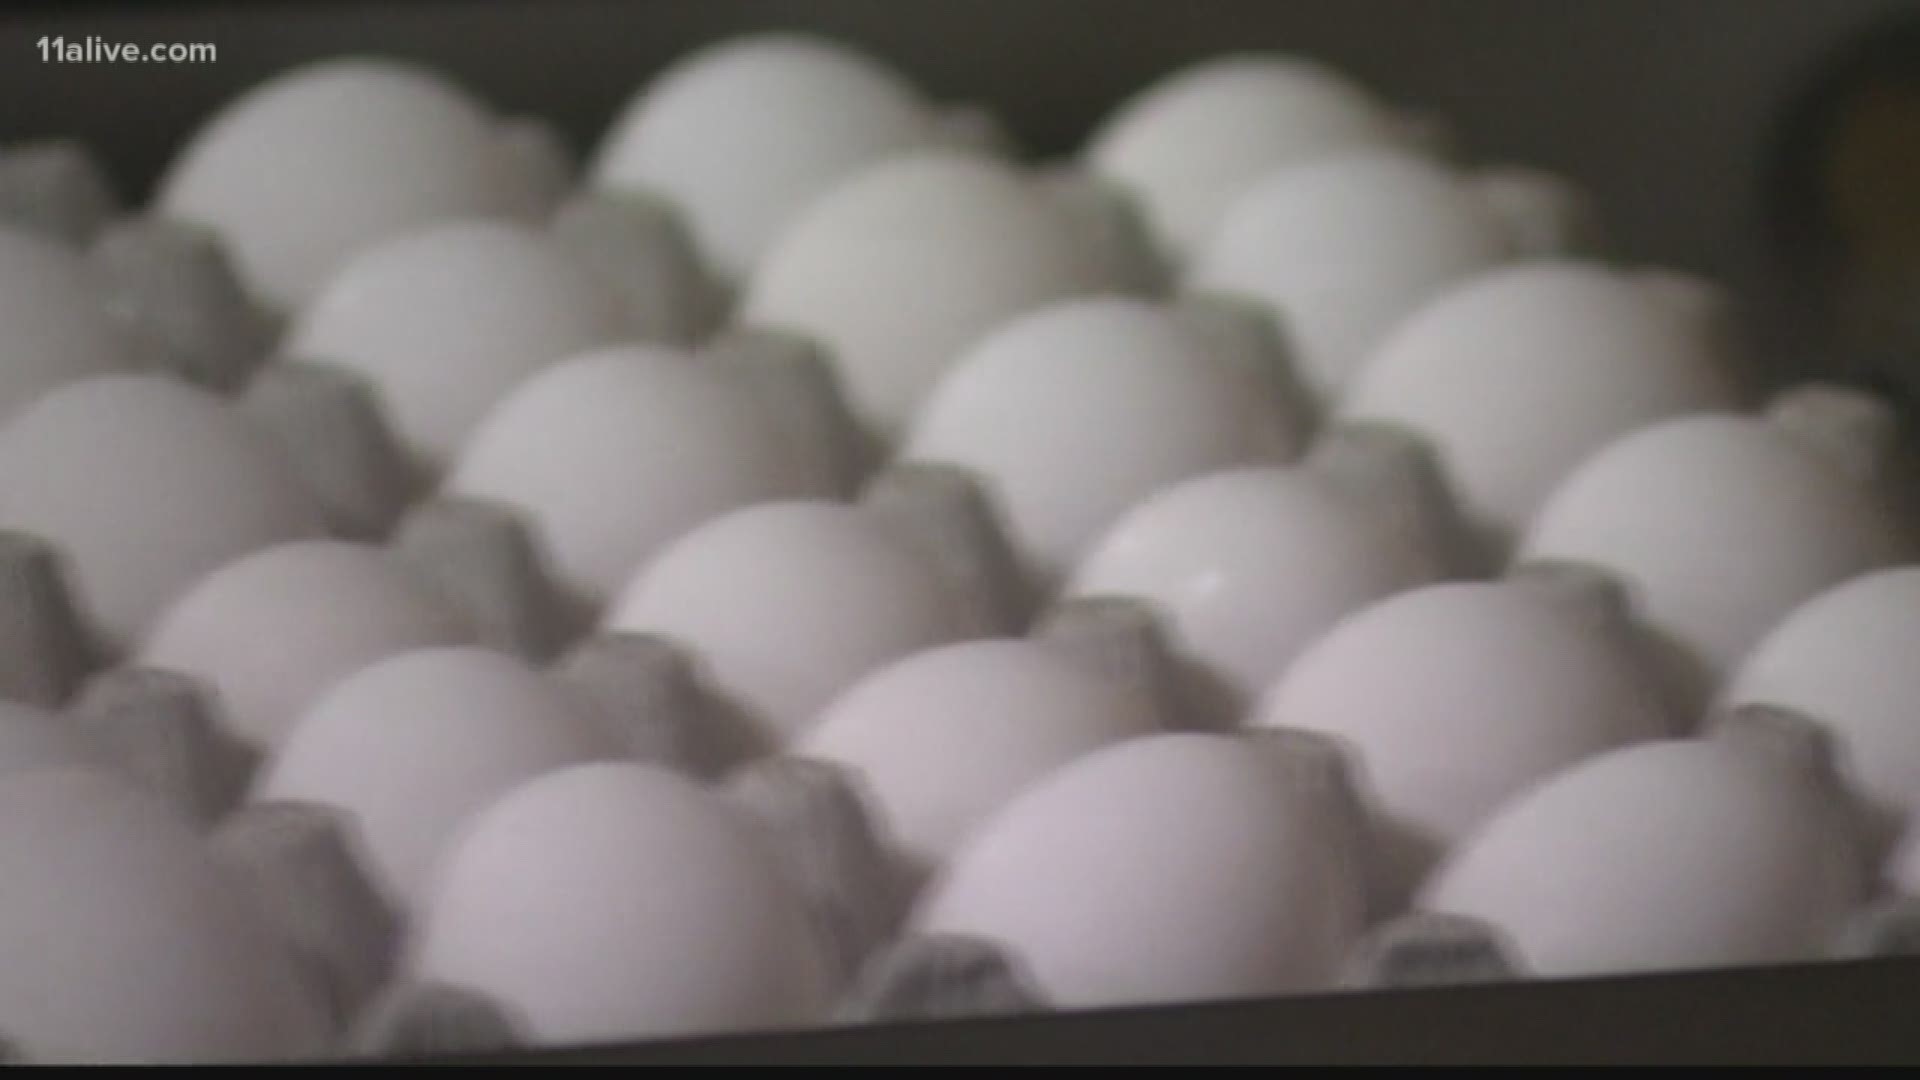 The recalls follow an alert over hard-boiled eggs. Seven people have gotten sick and one person has died.